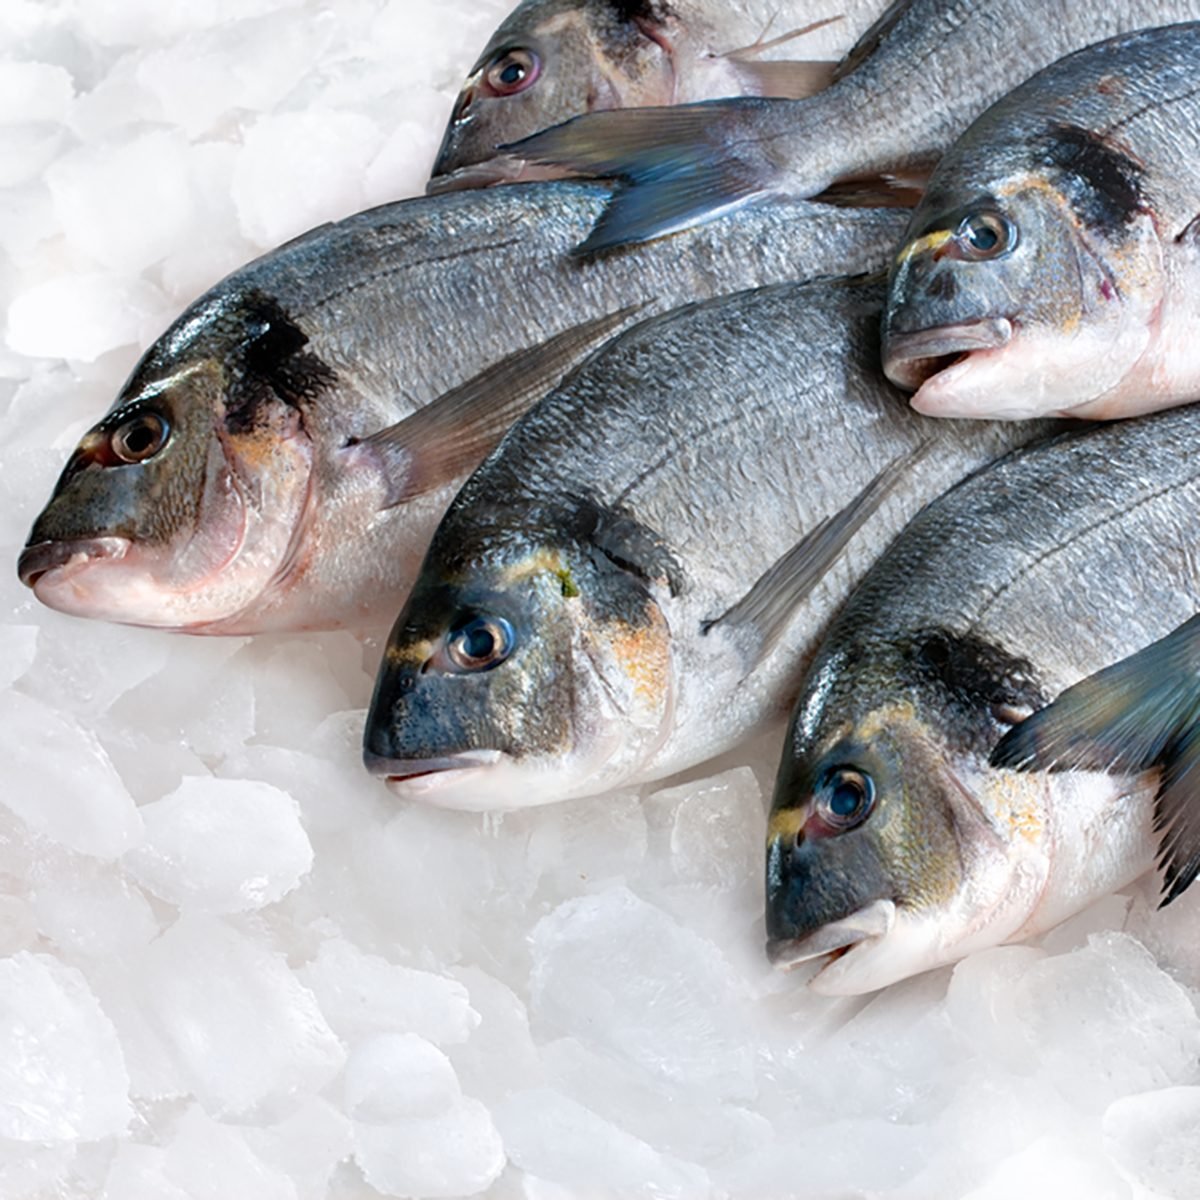 How to check the #freshness of fish? Call for order: 97548 61172